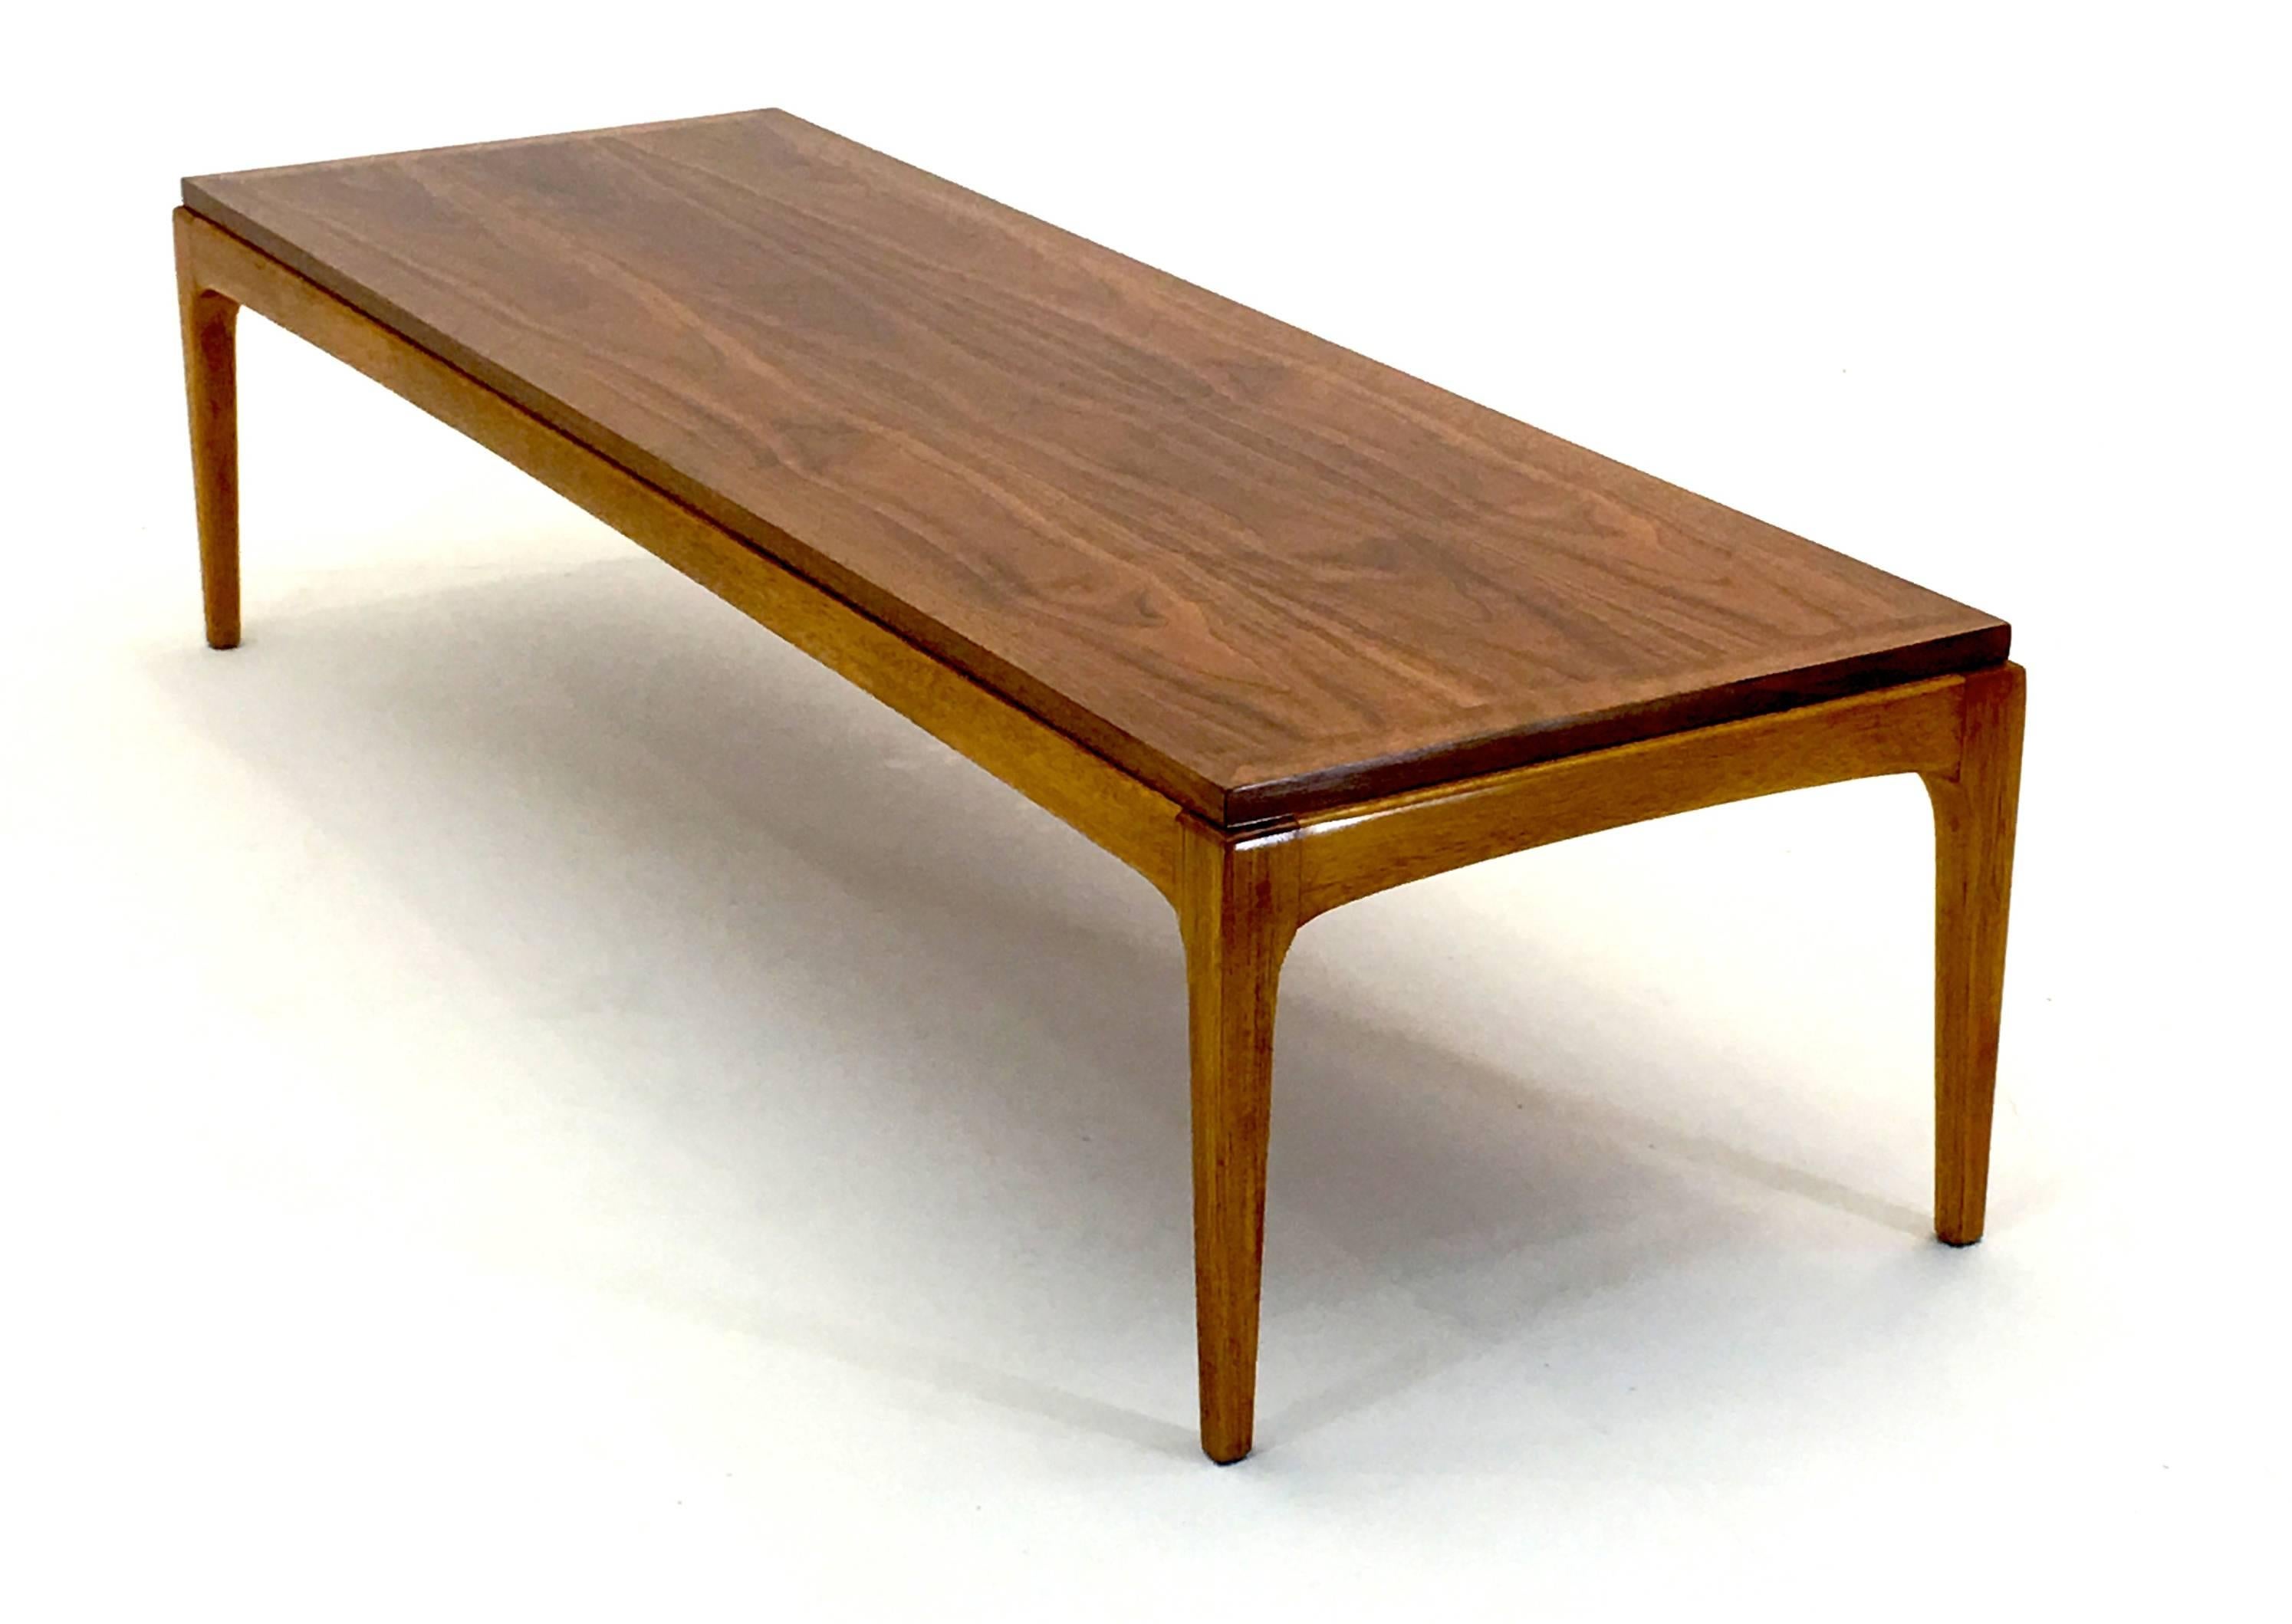 American Three-Piece Living Suite of Tables by Lane in Walnut, 1966